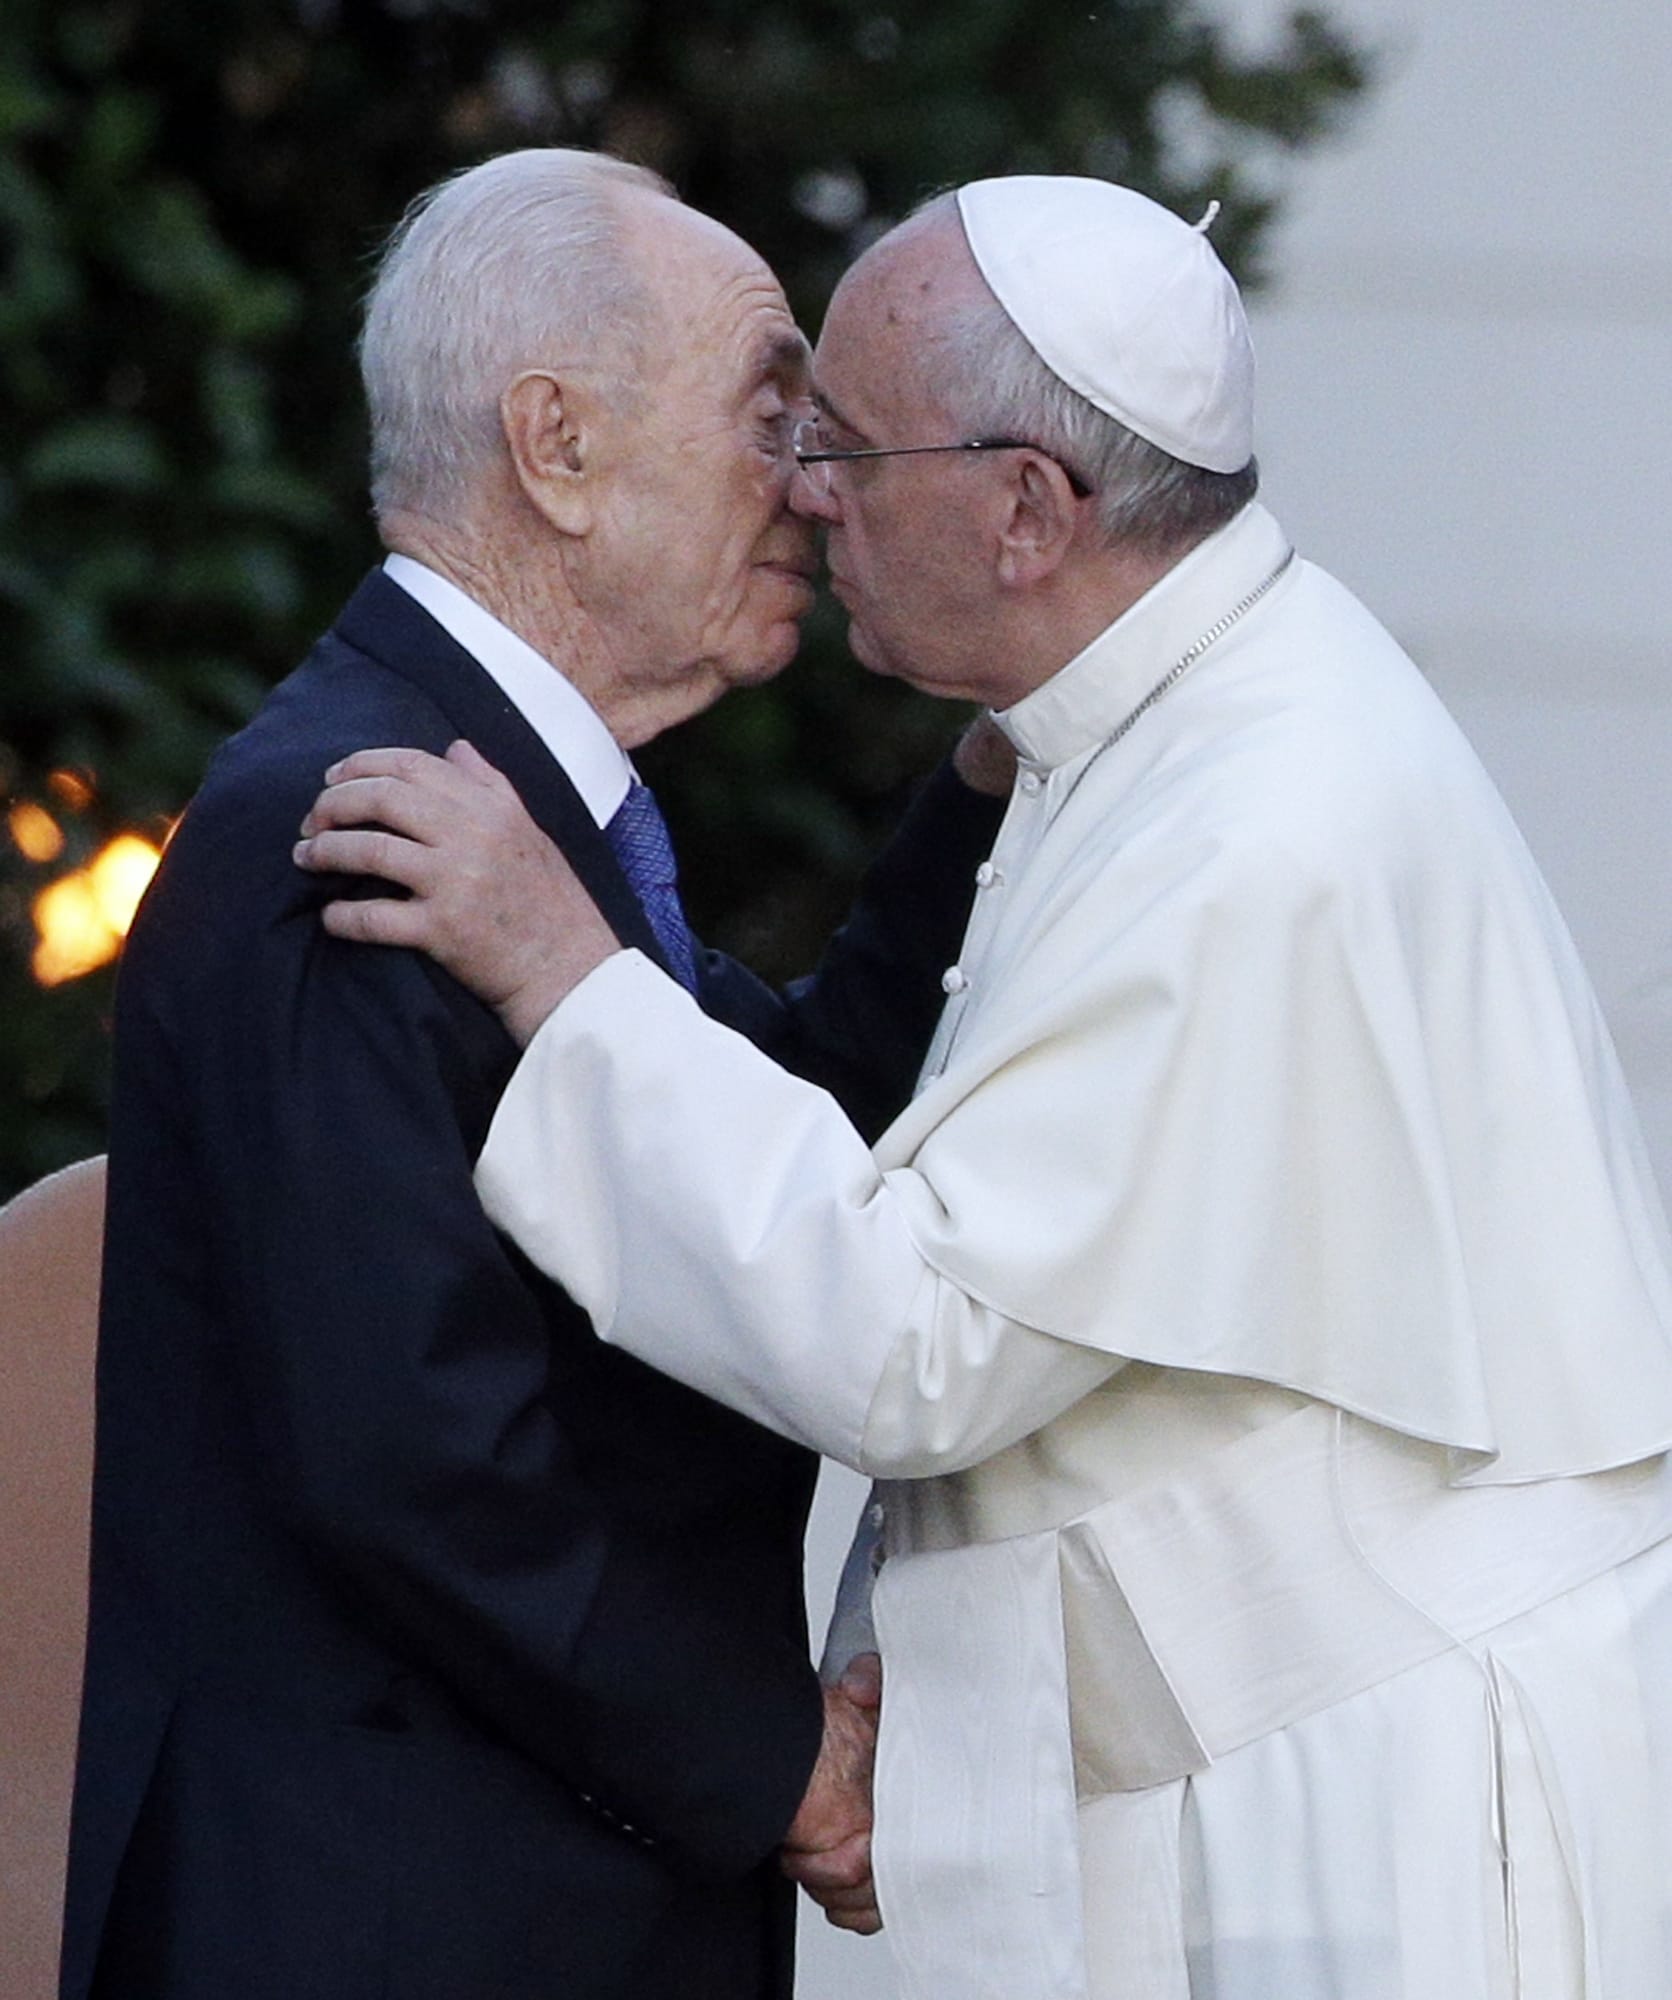 Associated Press
Pope Francis and Israel's President Shimon Peres, left, greet during an evening of peace prayers with Palestinian President Mahmoud Abbas in the Vatican gardens Sunday.